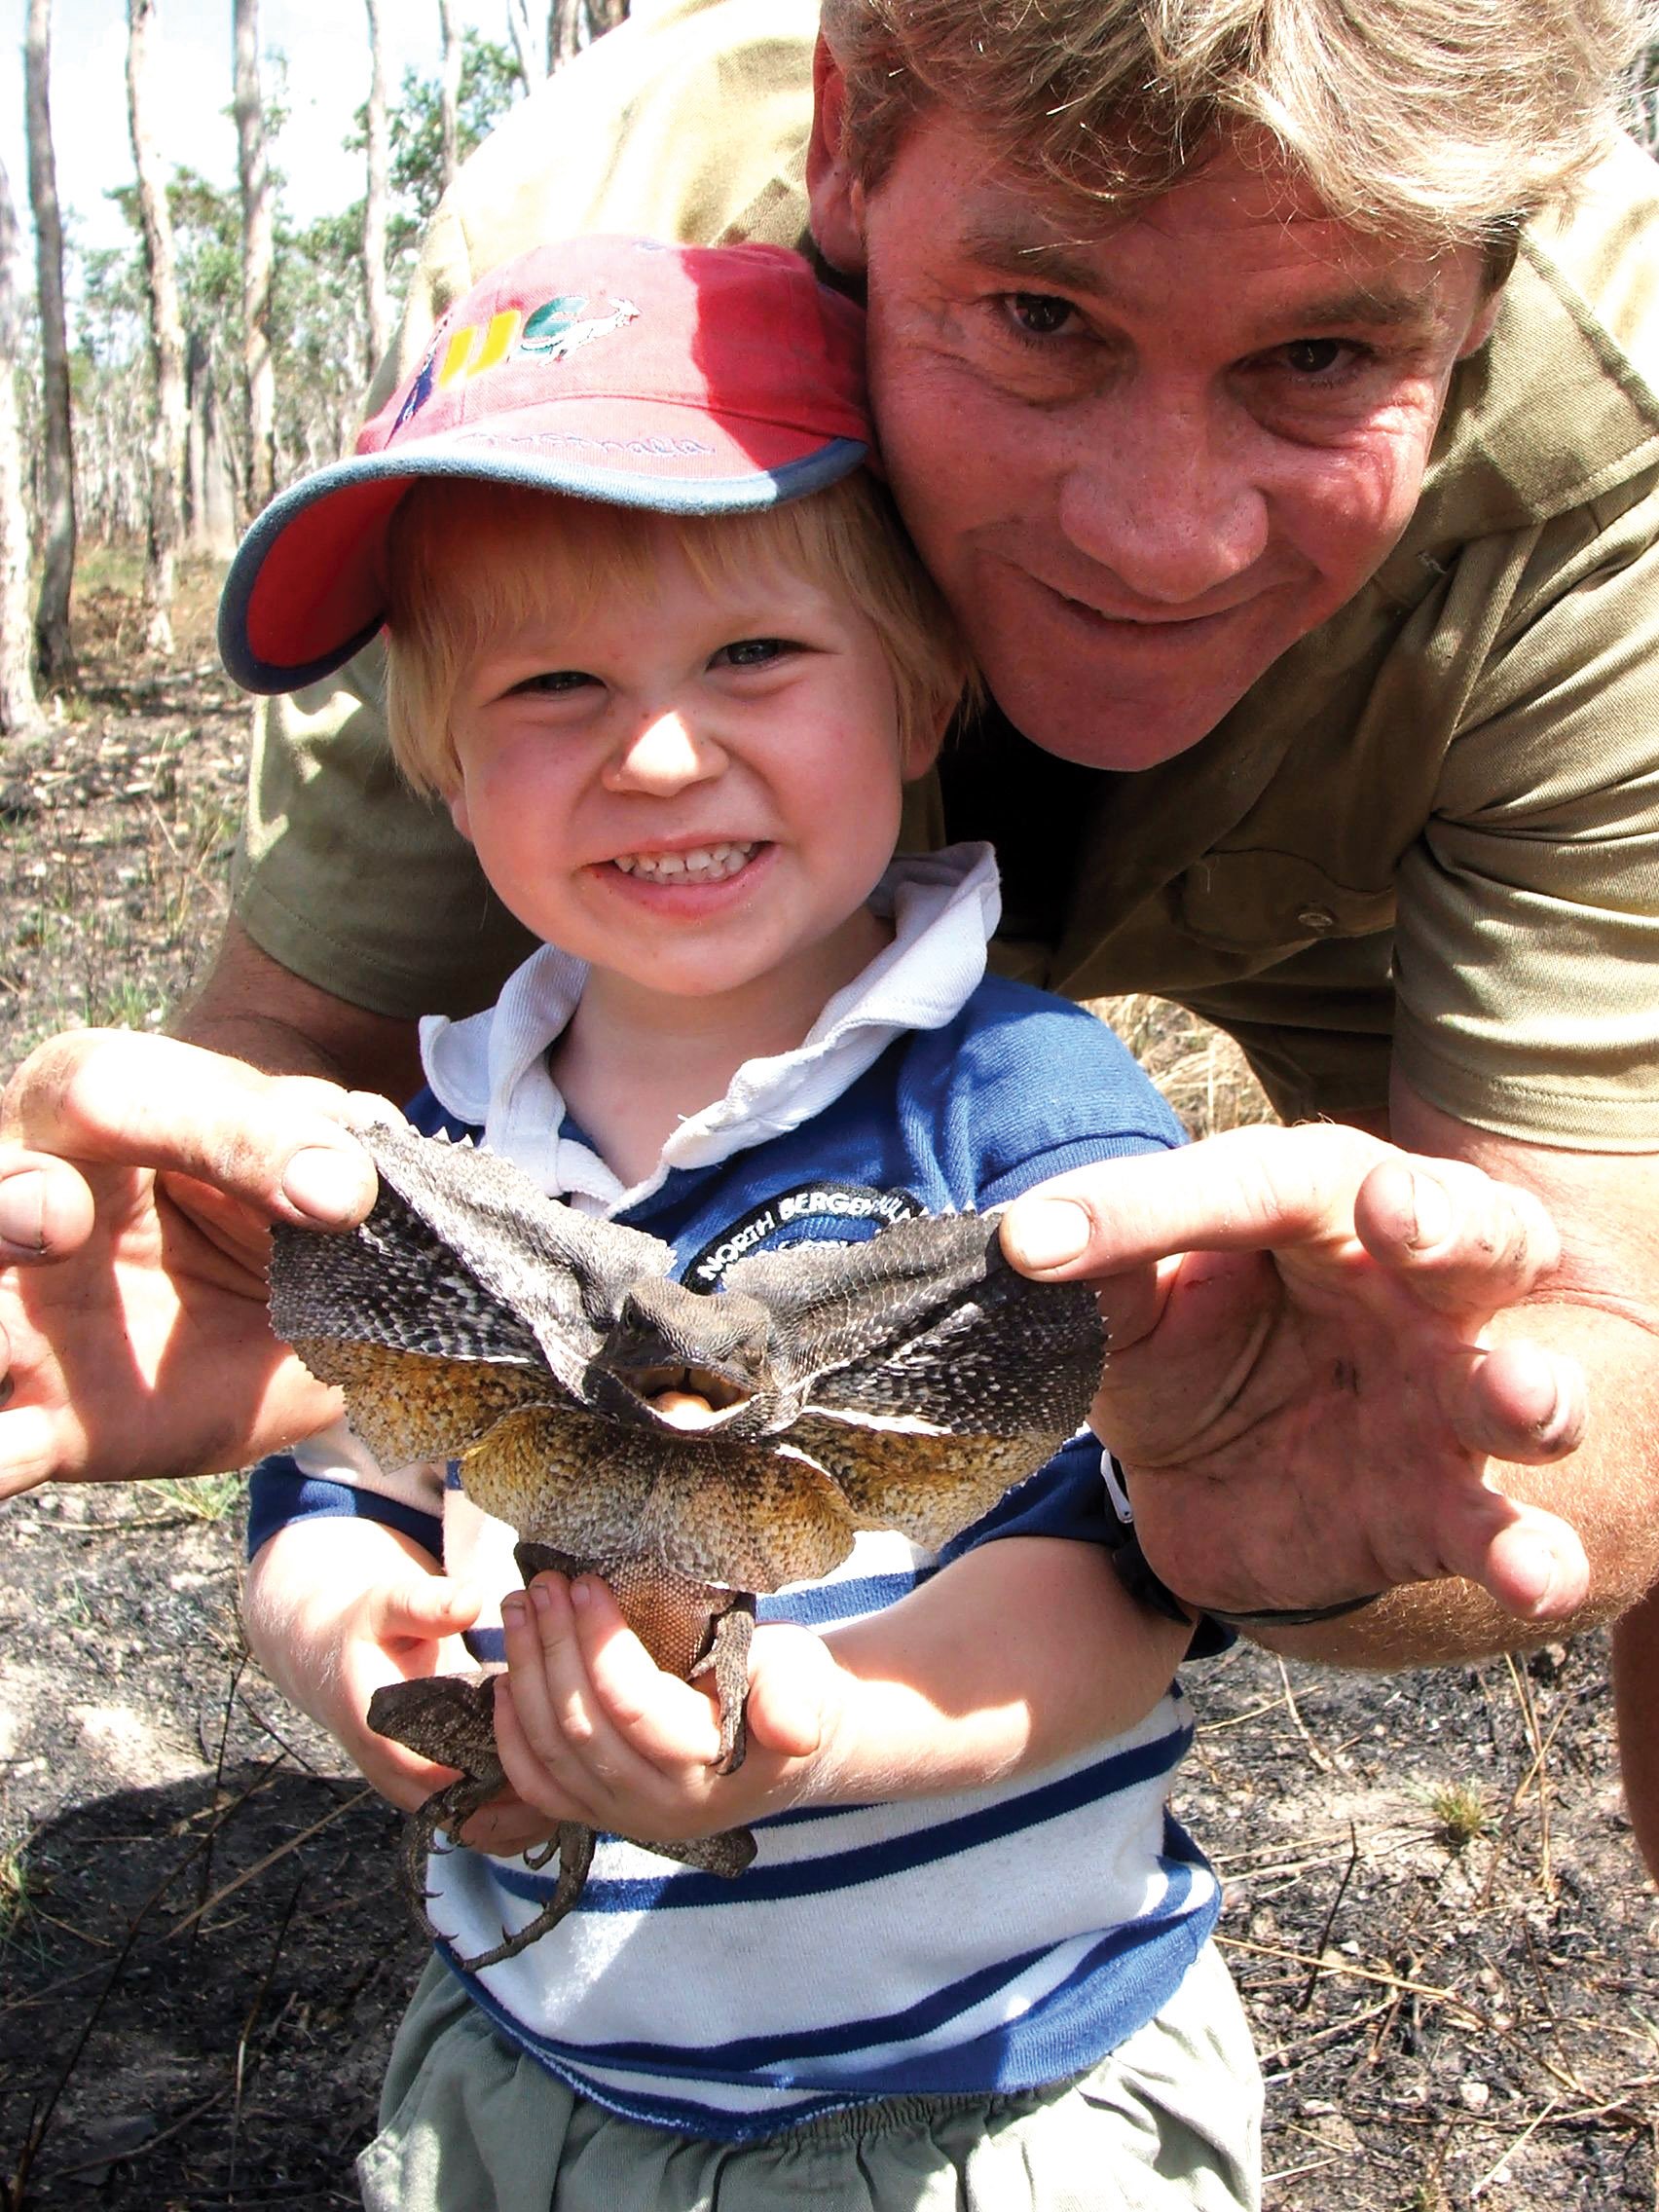 Steve Irwin poses with his son Robert at Australia Zoo on August 2, 2006, in Beerwah, Australia. | Source: Getty Images